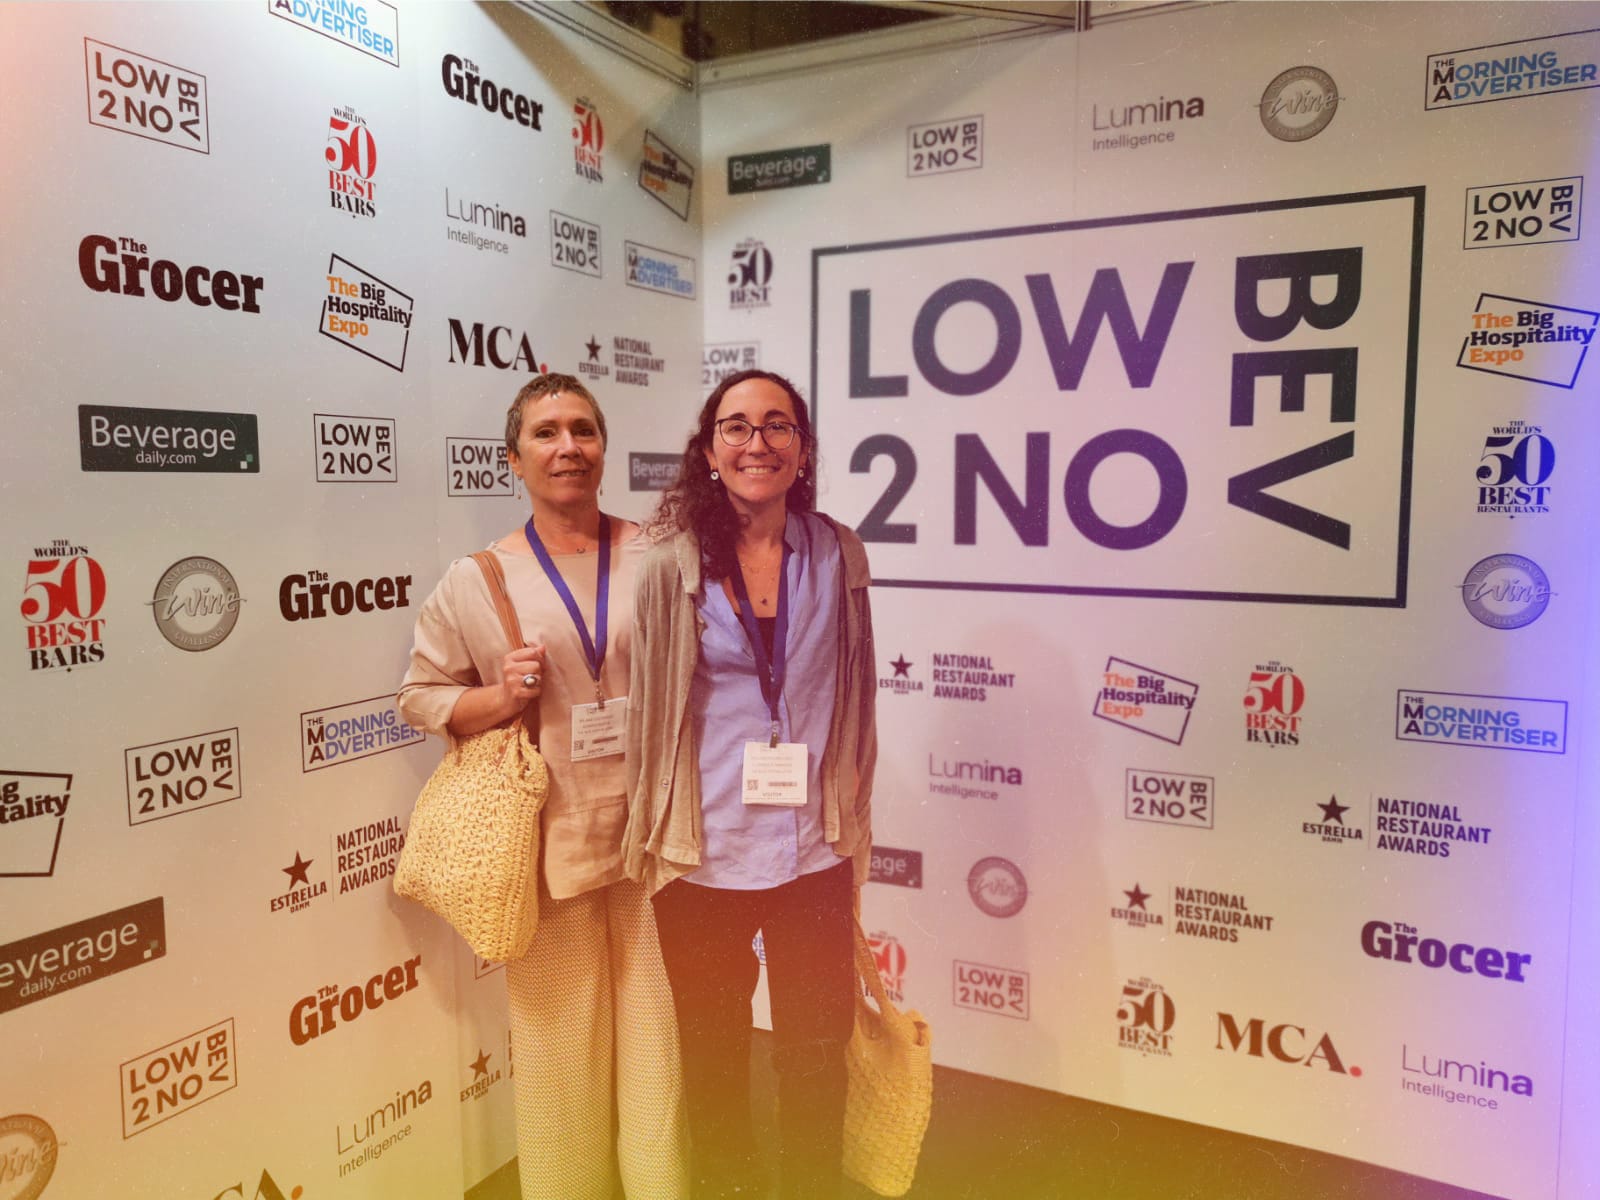 We visited Low2NoBev, the International Non-Alcoholic Beverages Fair held in London